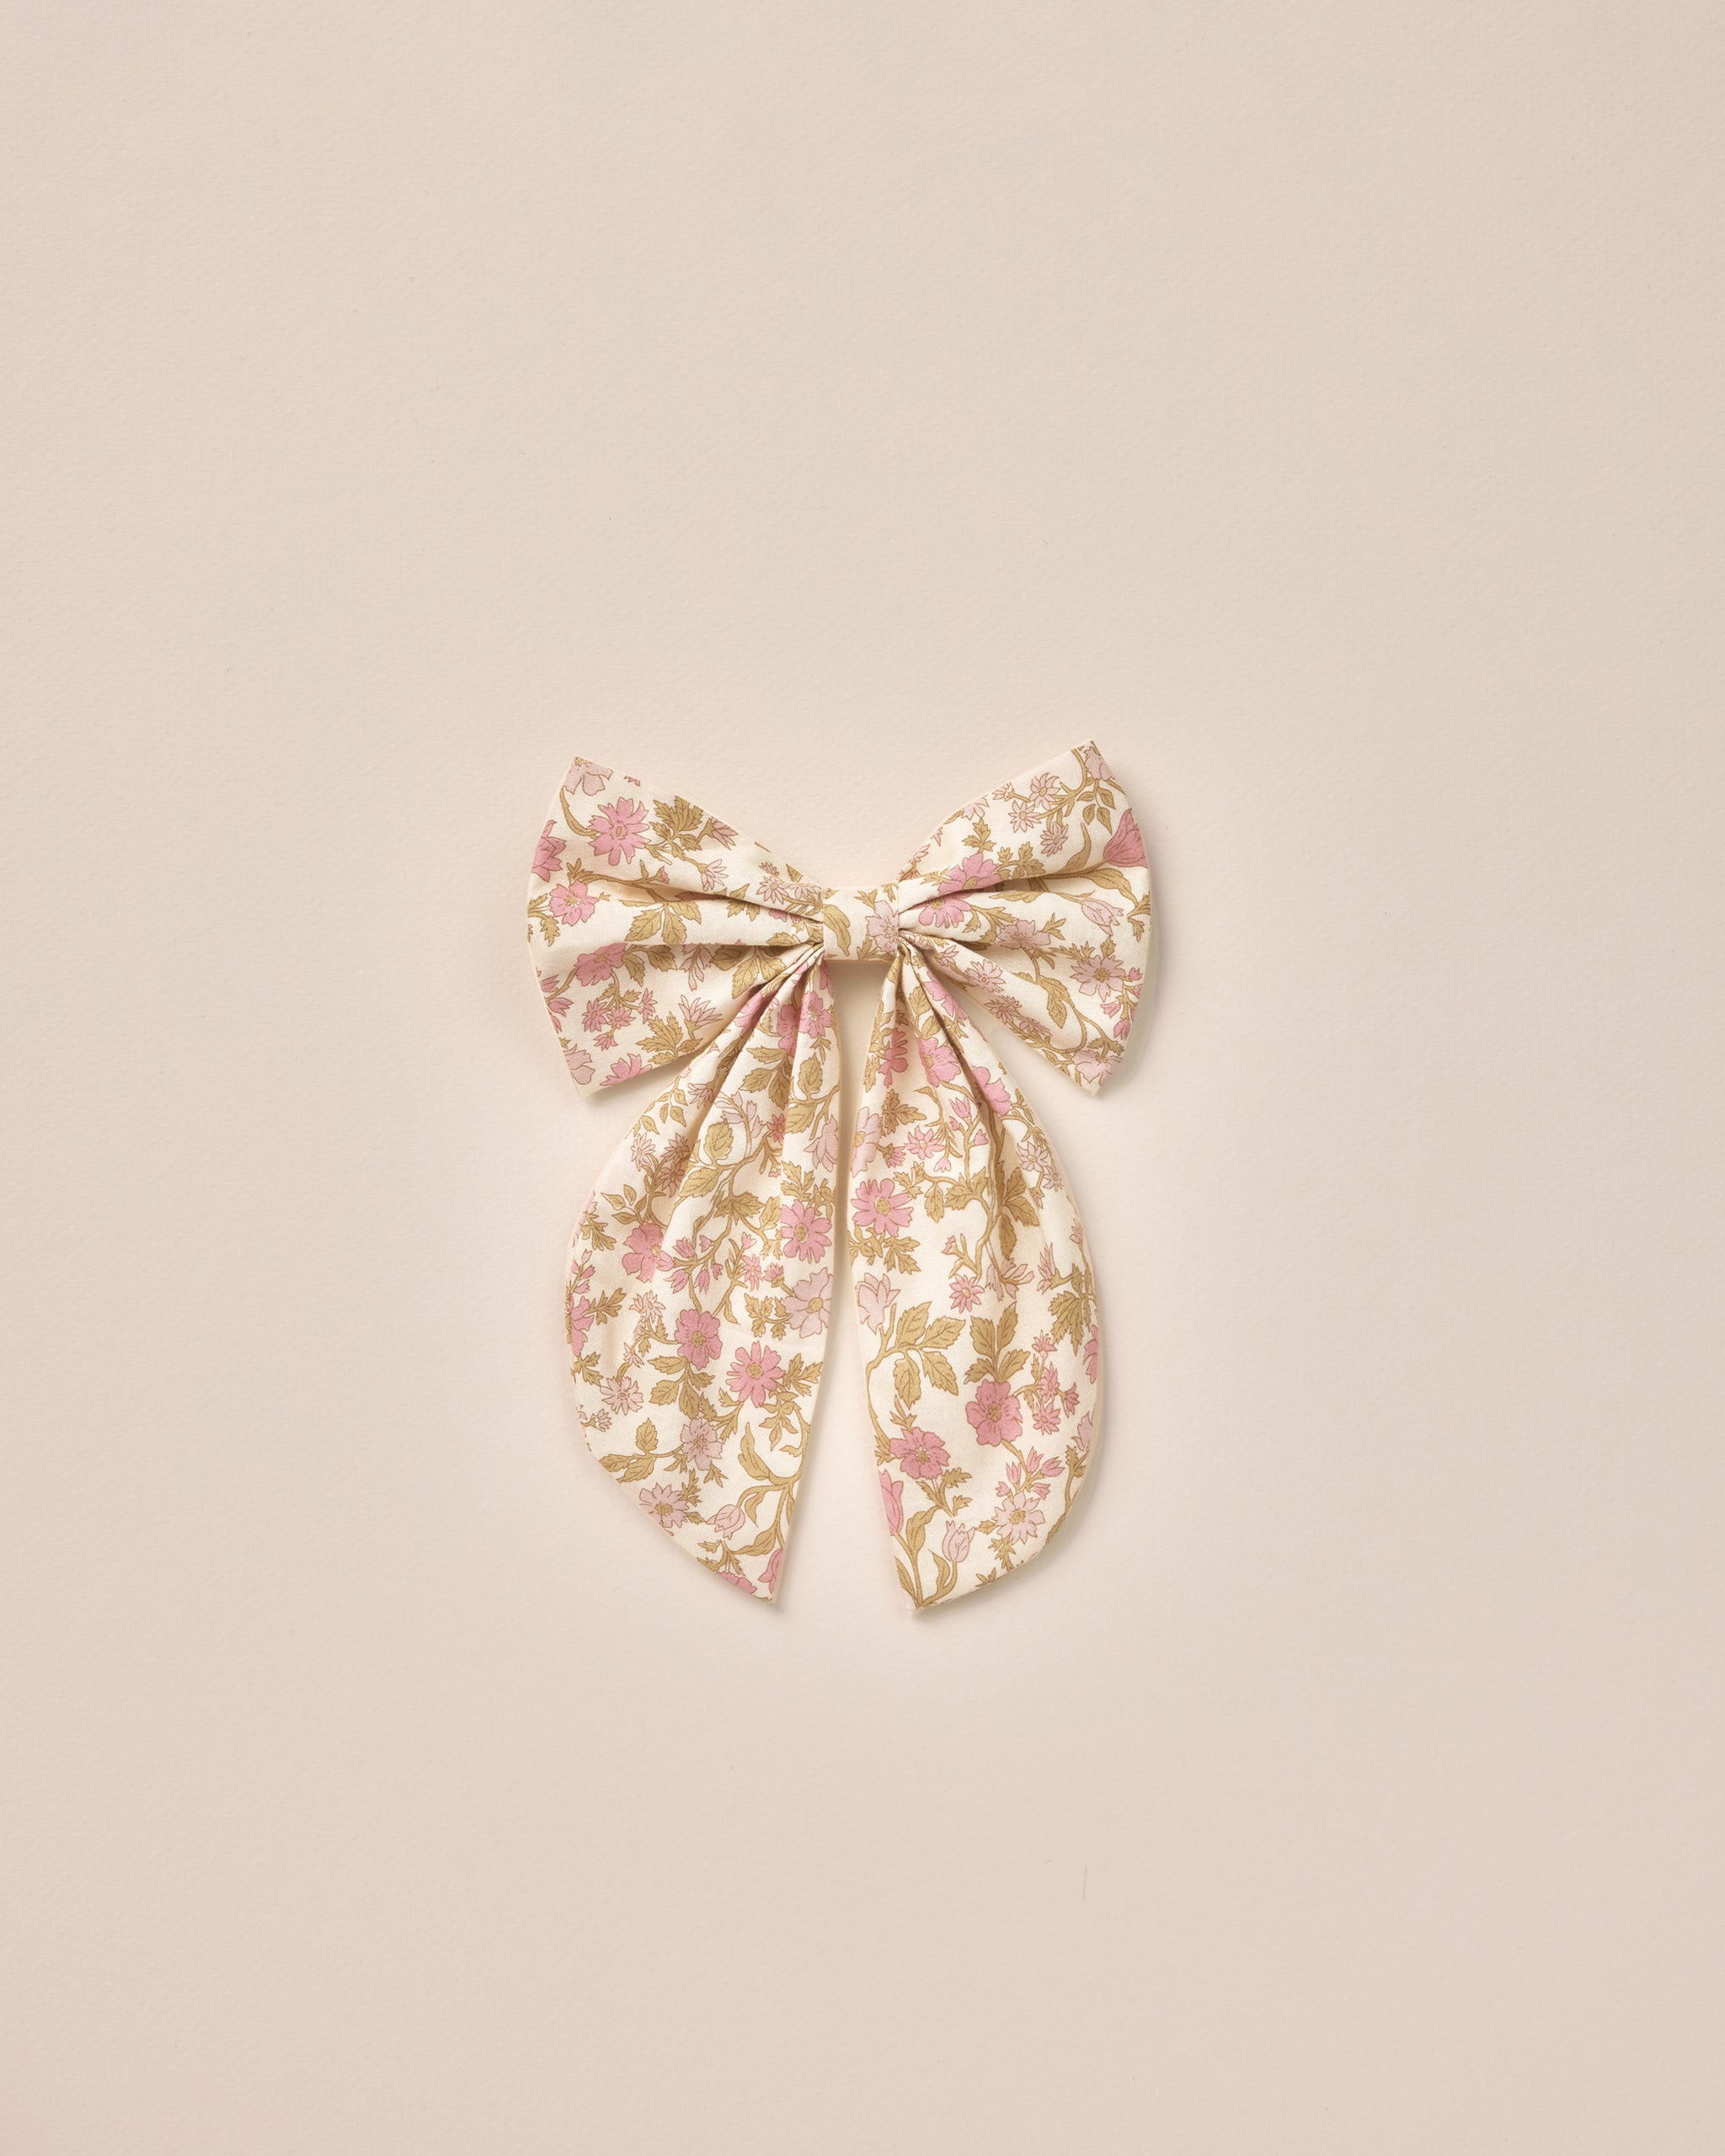 Oversized Bow || Wildflowers - Rylee + Cru | Kids Clothes | Trendy Baby Clothes | Modern Infant Outfits |